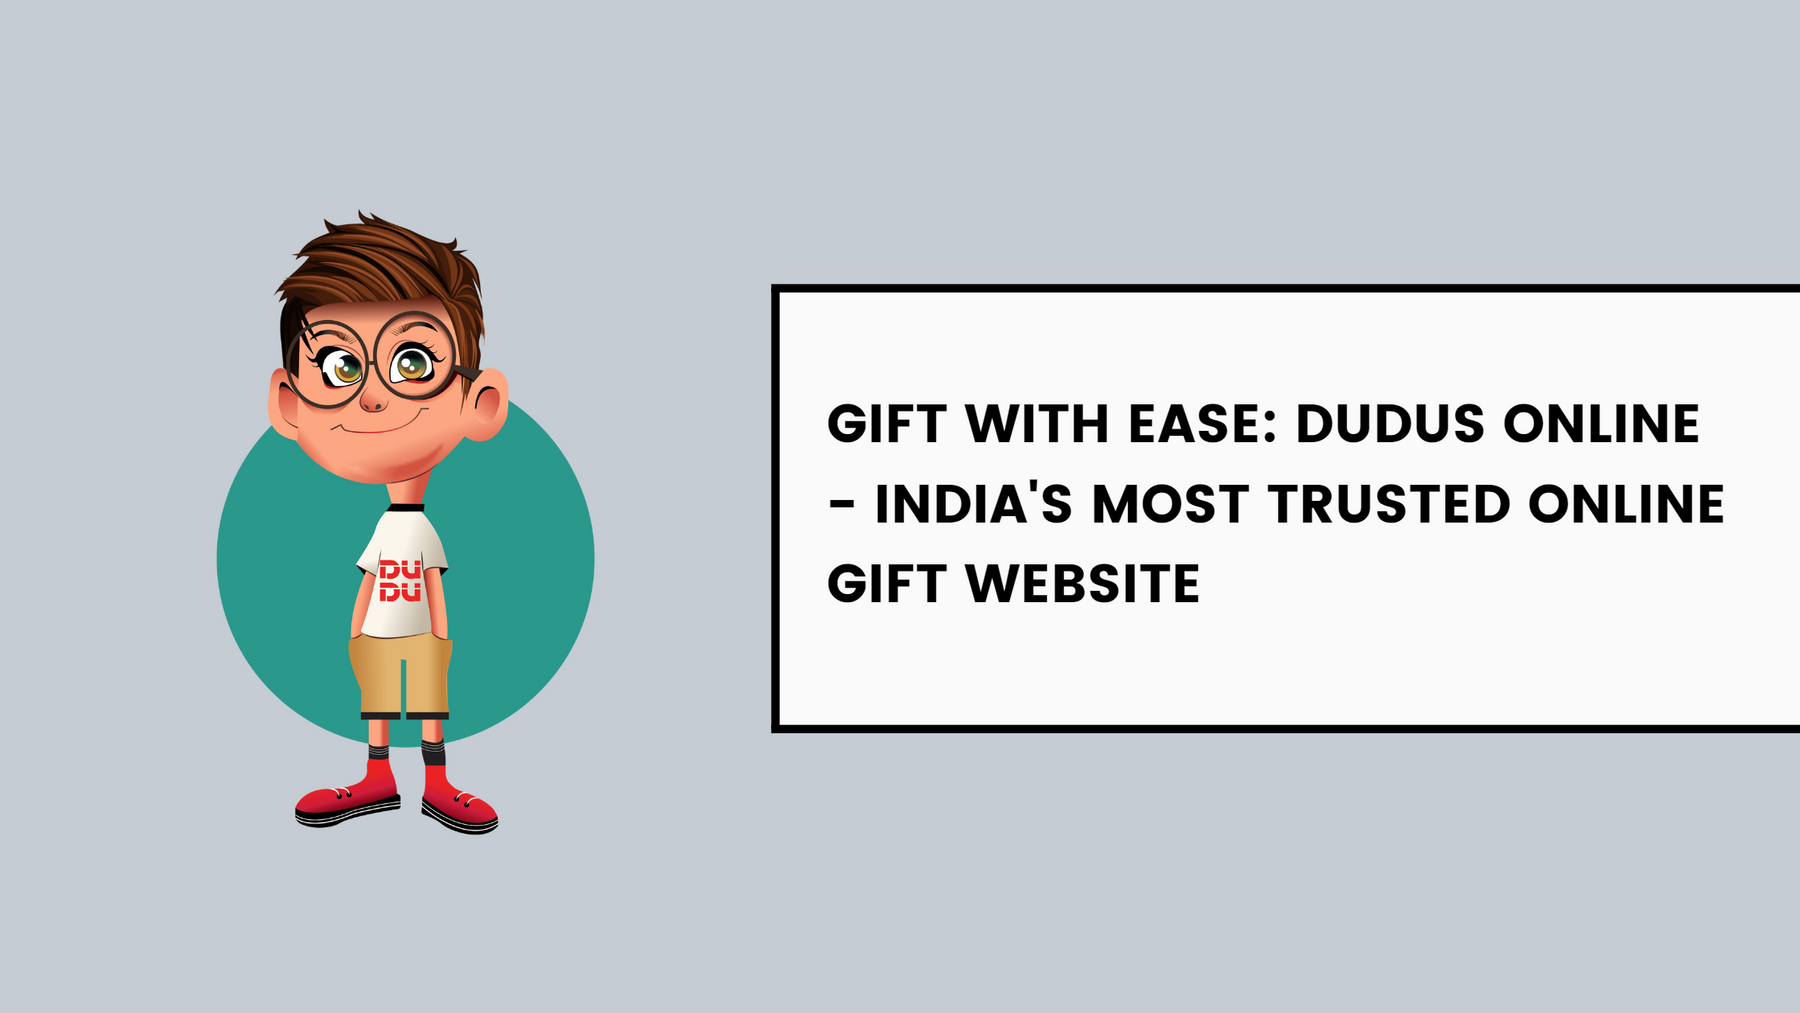 Gift With Ease: Dudus Online - India's Most Trusted Online Gift Website